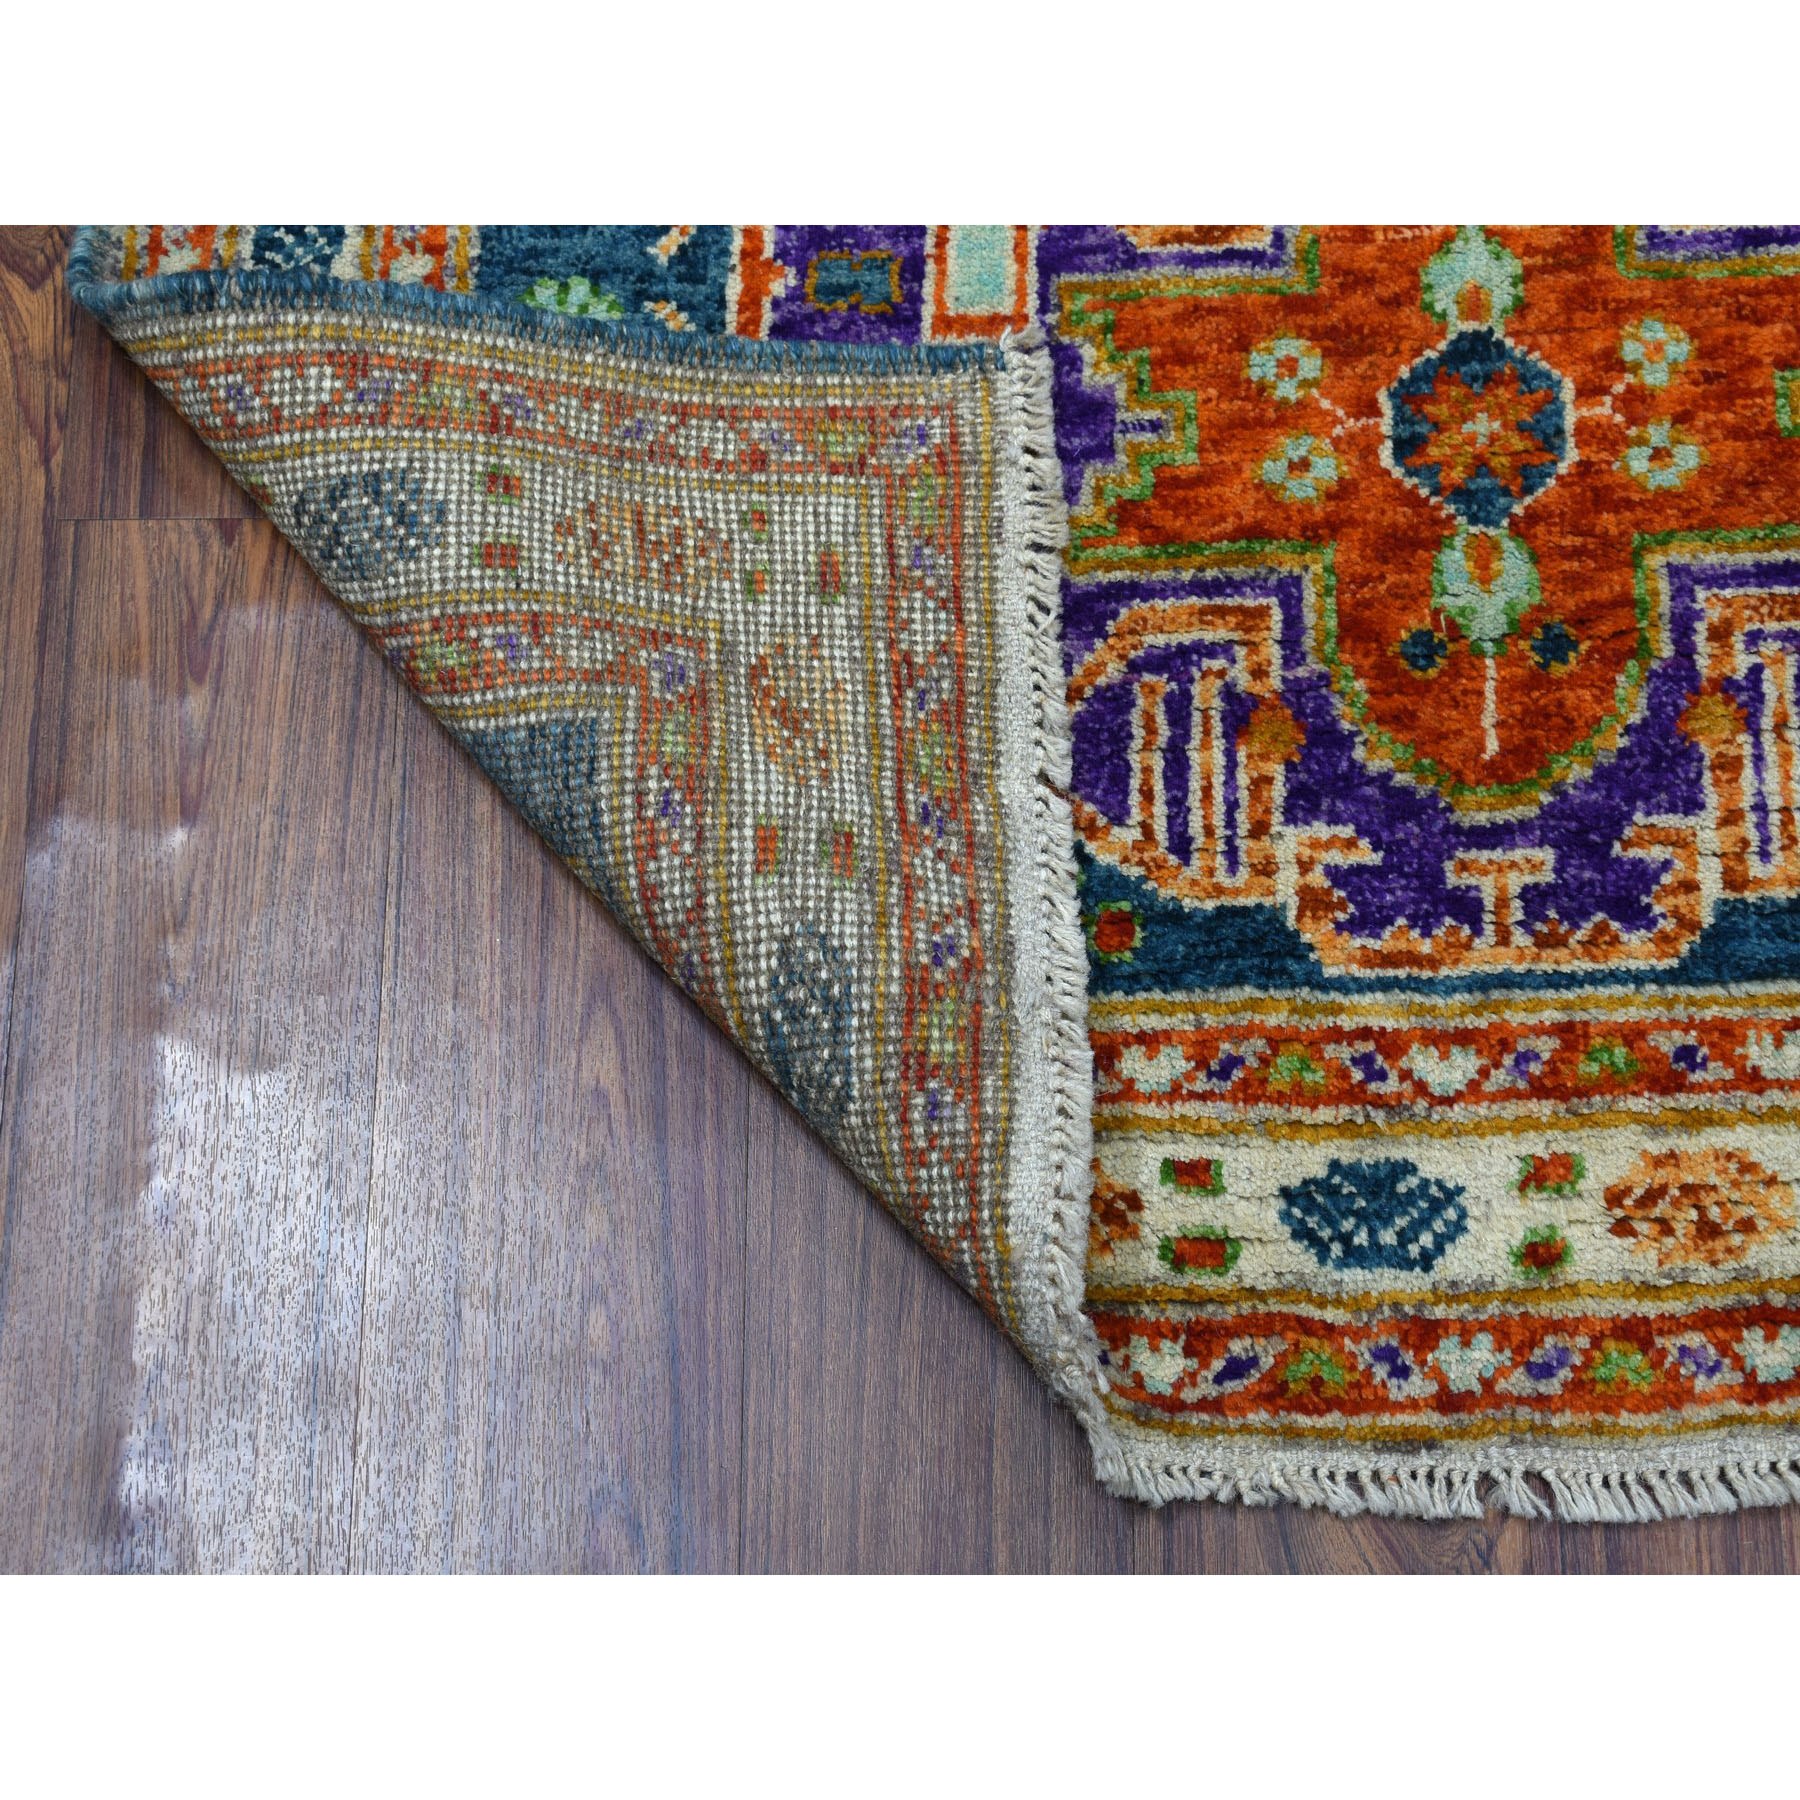 4-x5-9  Orange Natural Dyes Colorful Afghan Baluch Geometric Design Hand Knotted 100% Wool Oriental Rug 